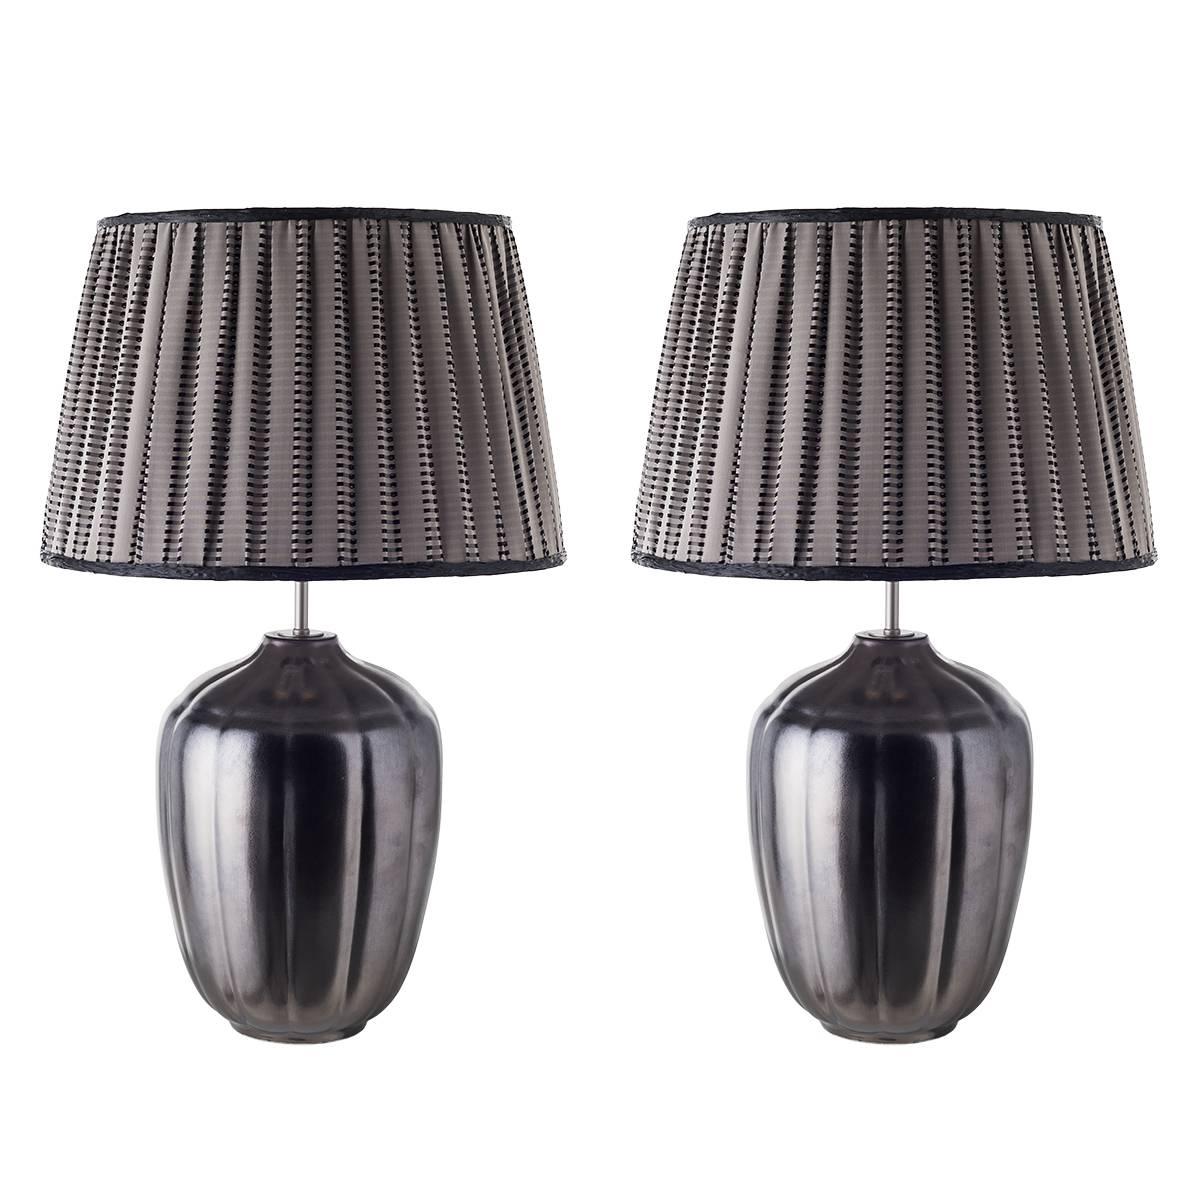 Pair of Sinuous Ceramic Table Lamps For Sale